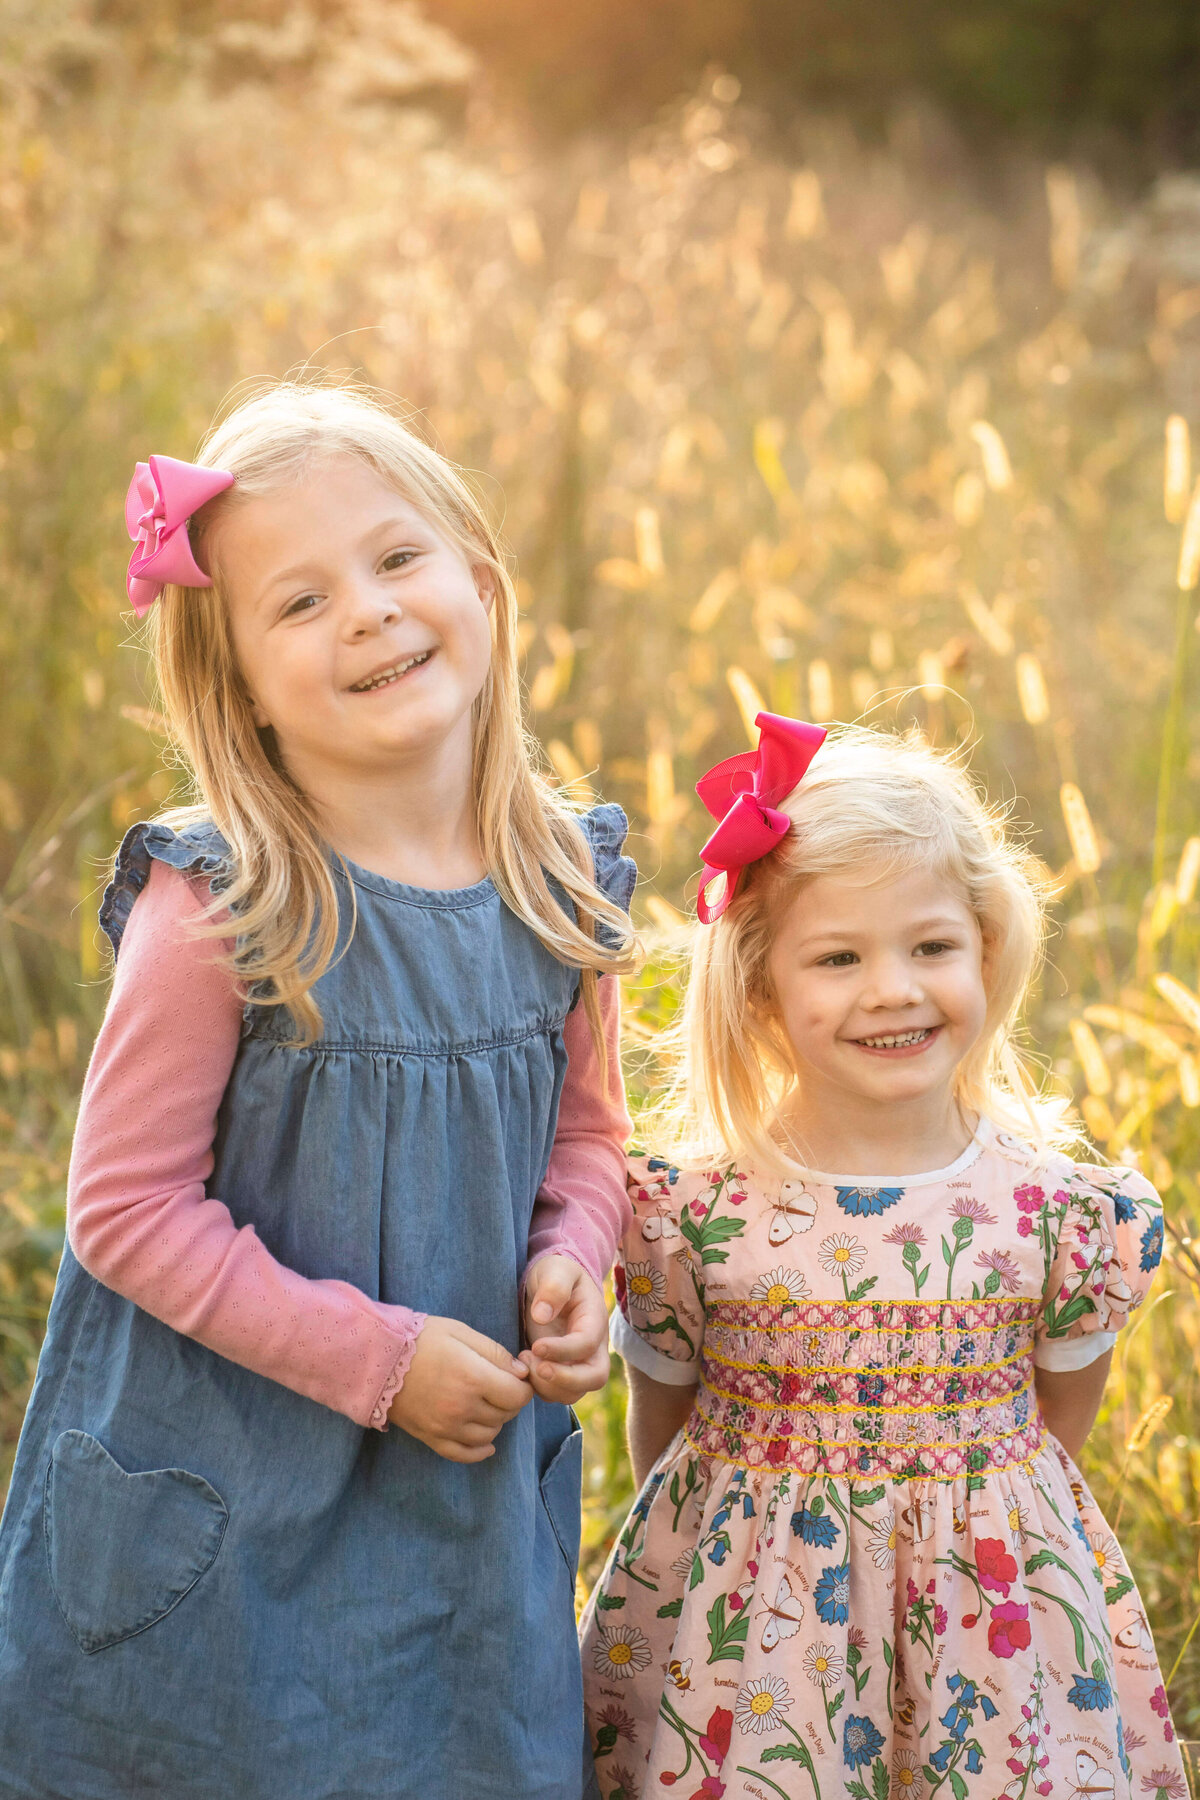 2 young sisters smiling at the camera during sunset in a field of tall grass